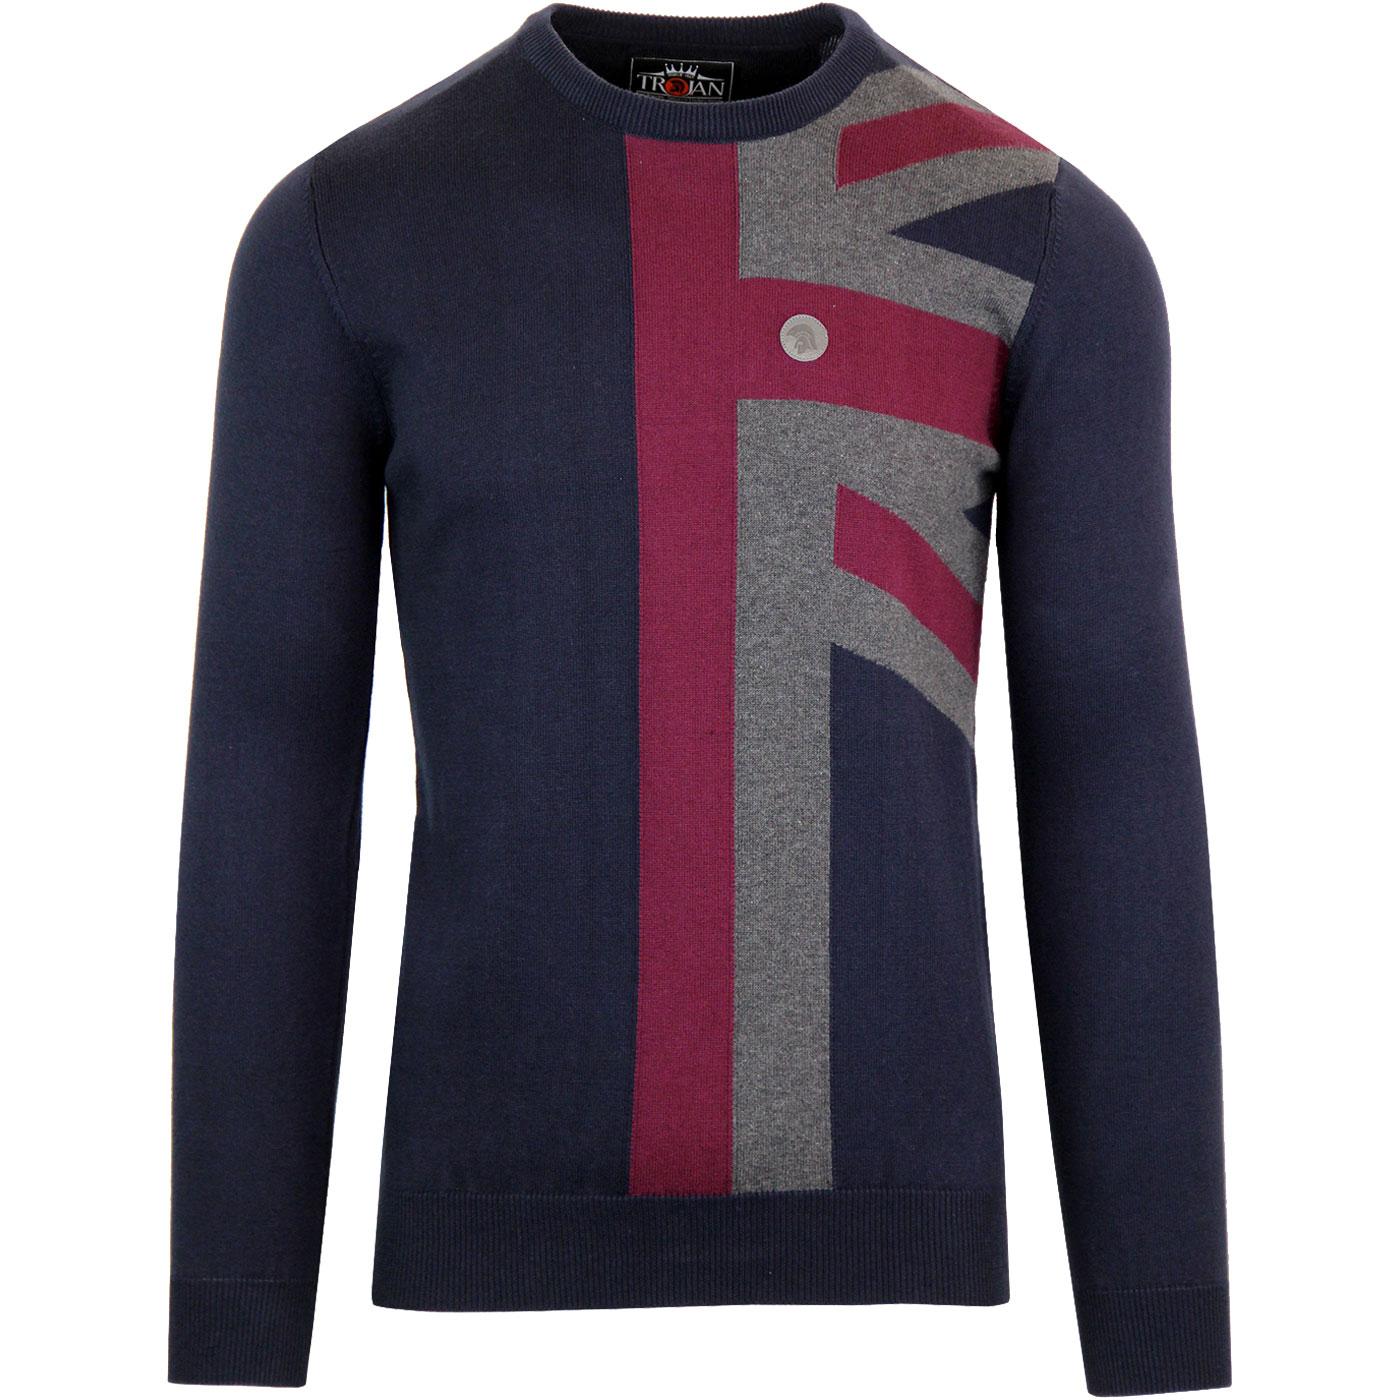 TROJAN RECORDS Knitted Crew Neck Union Jack Jumper